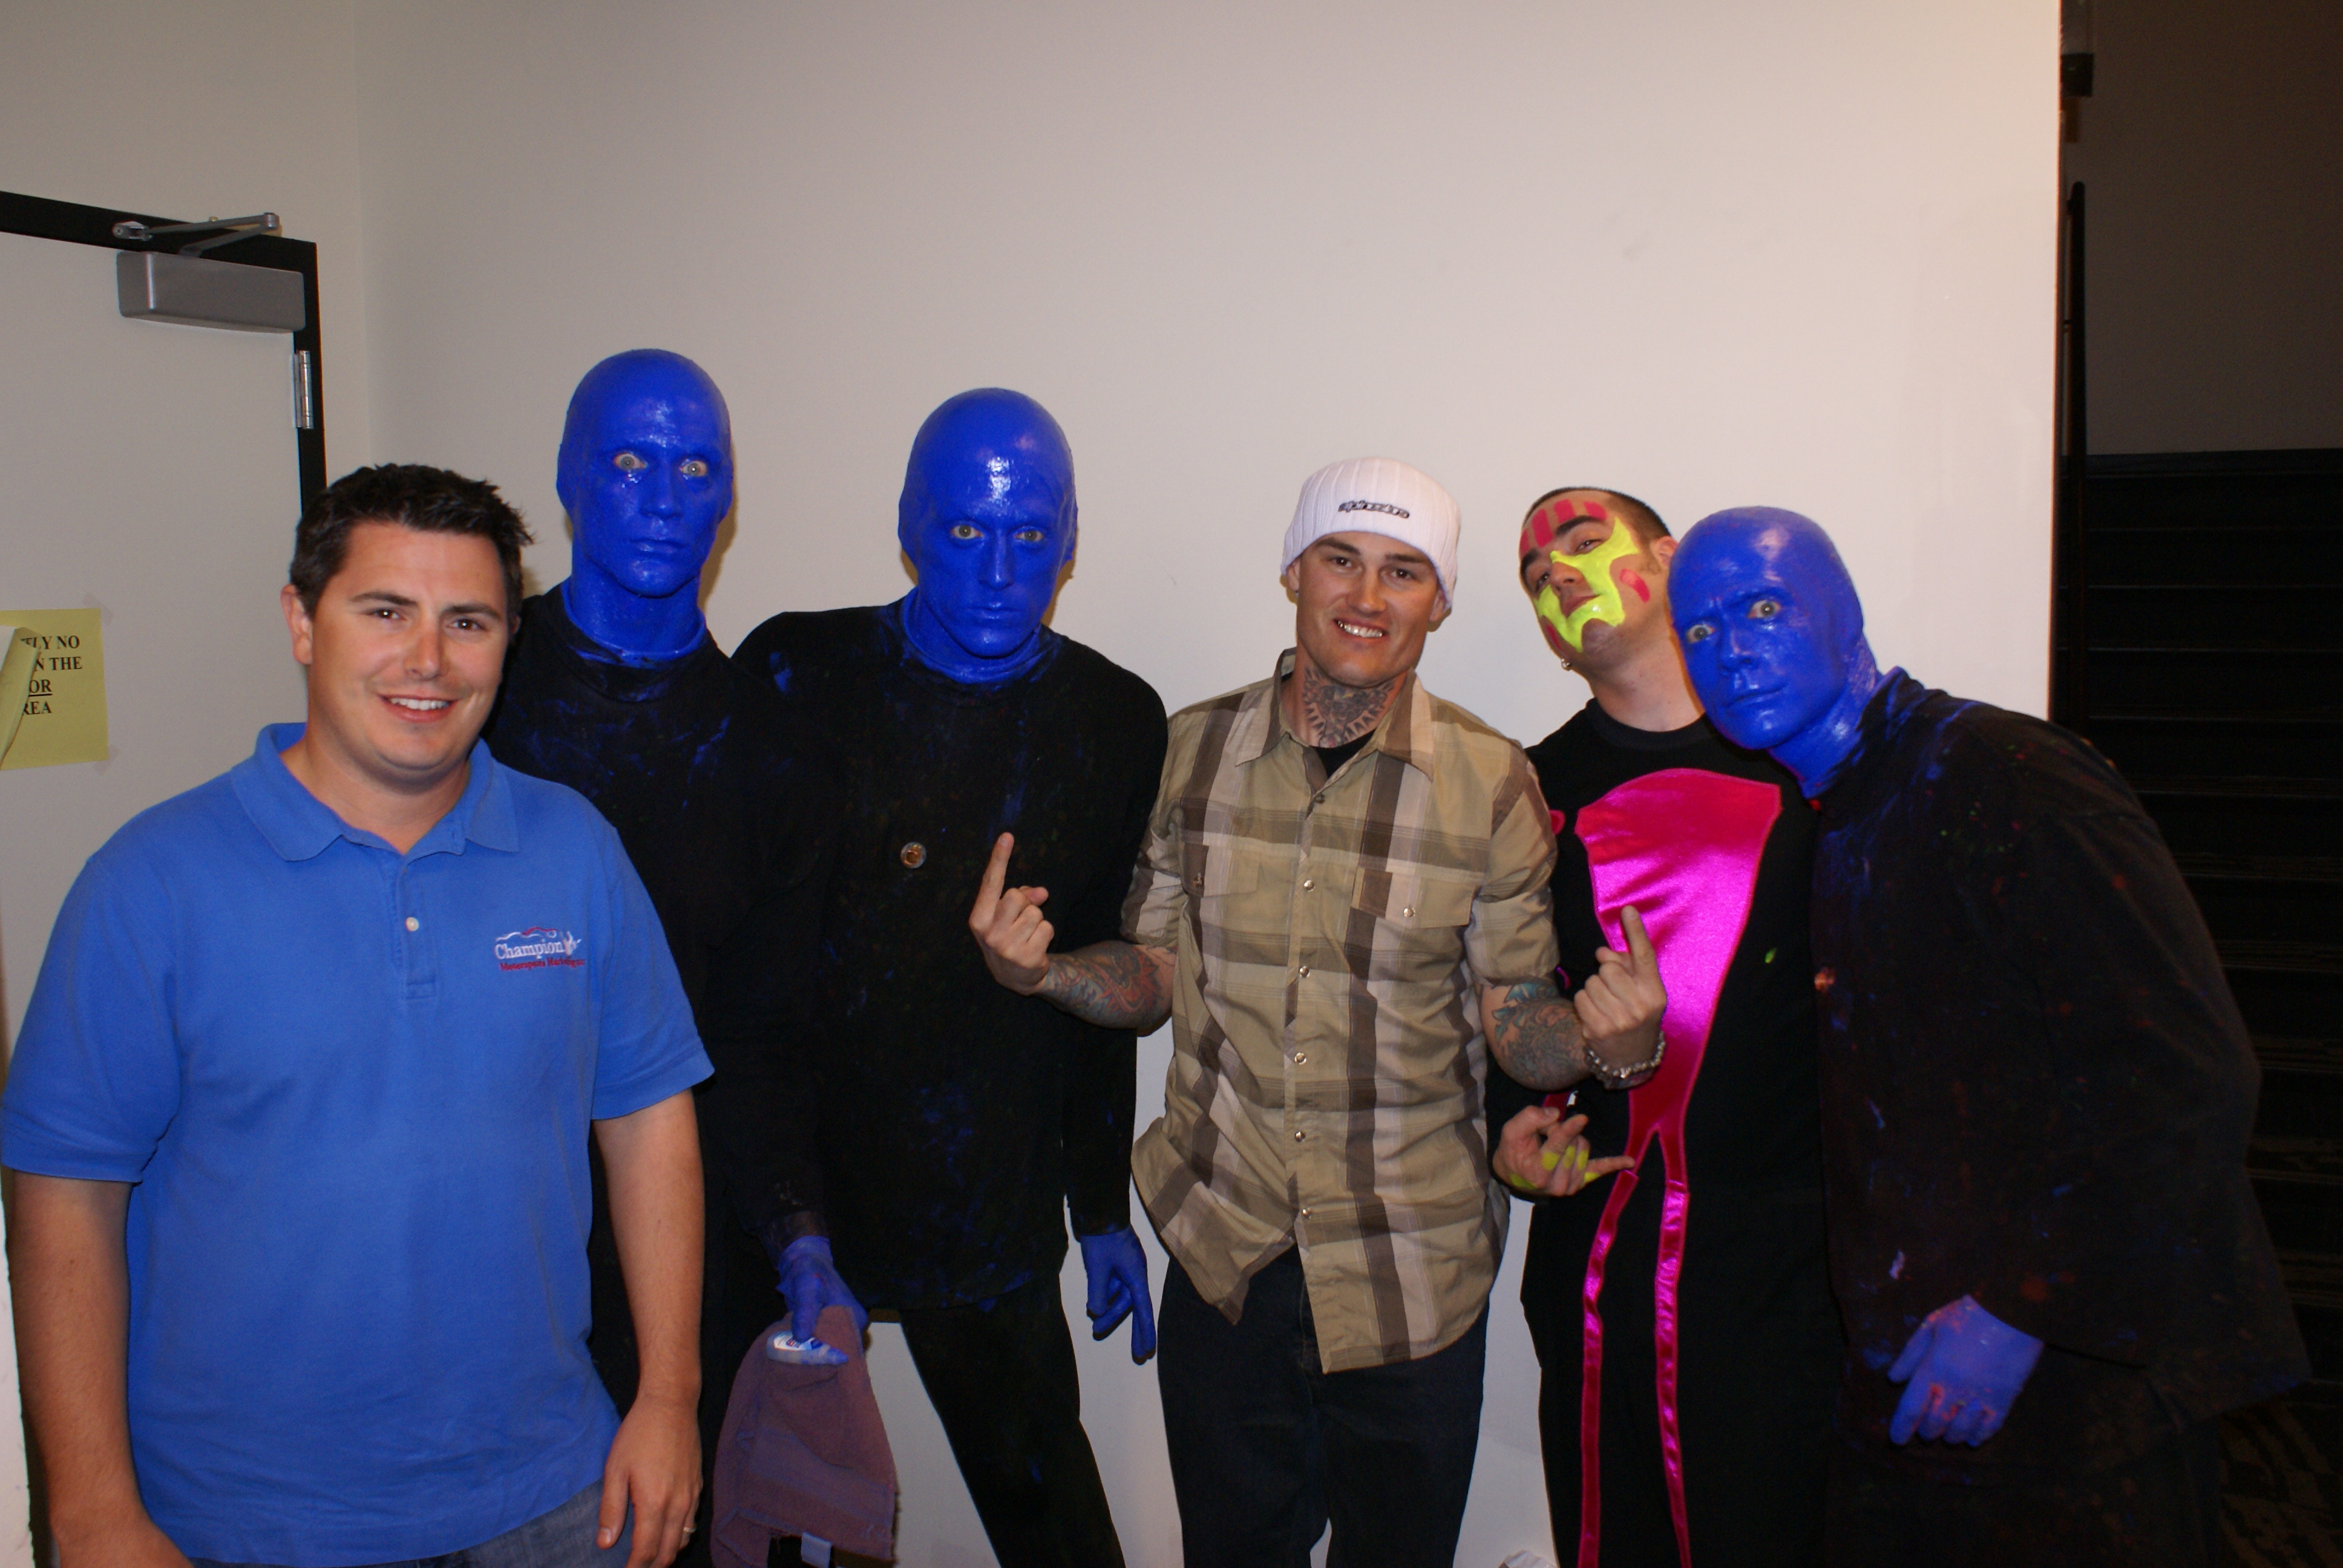 Ryan Johnston pictured with Mike Metzger the Godfather backstage with the Blue Man Group at the Venetian in Las Vegas 2007.